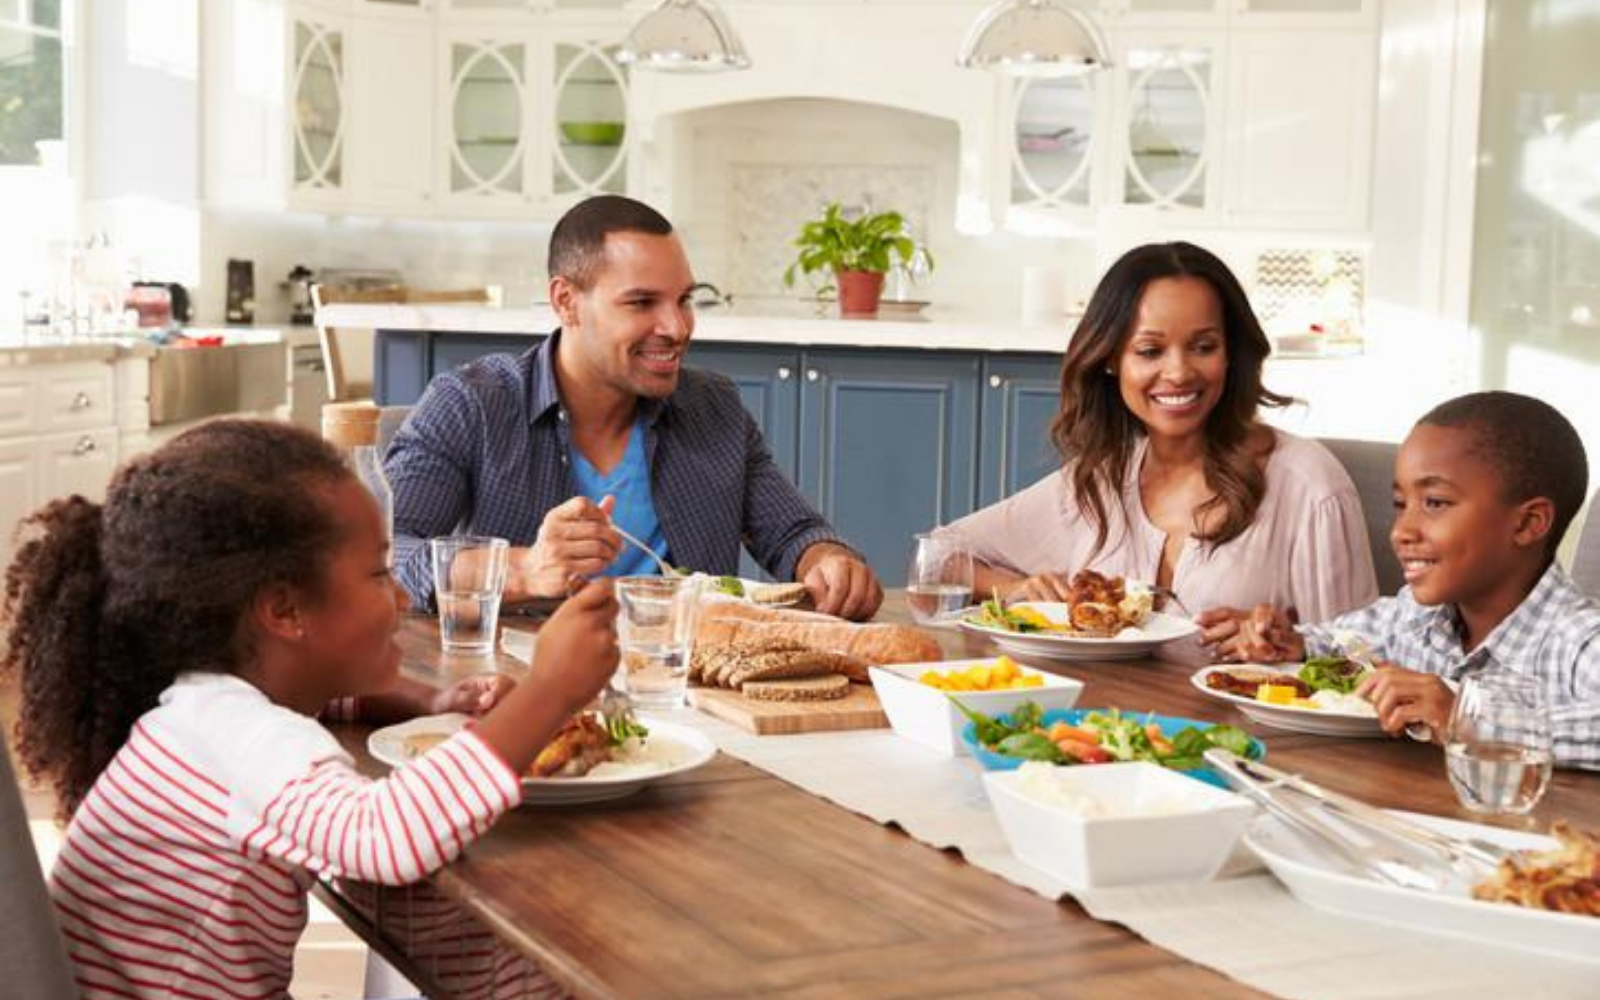 As a Certified Intuitive Eating Counsellor and Registered Dietitian, Jennifer Neale RD teaches you how to nourish your body and rejoin the dinner table. No more missing out on food your family is enjoying.